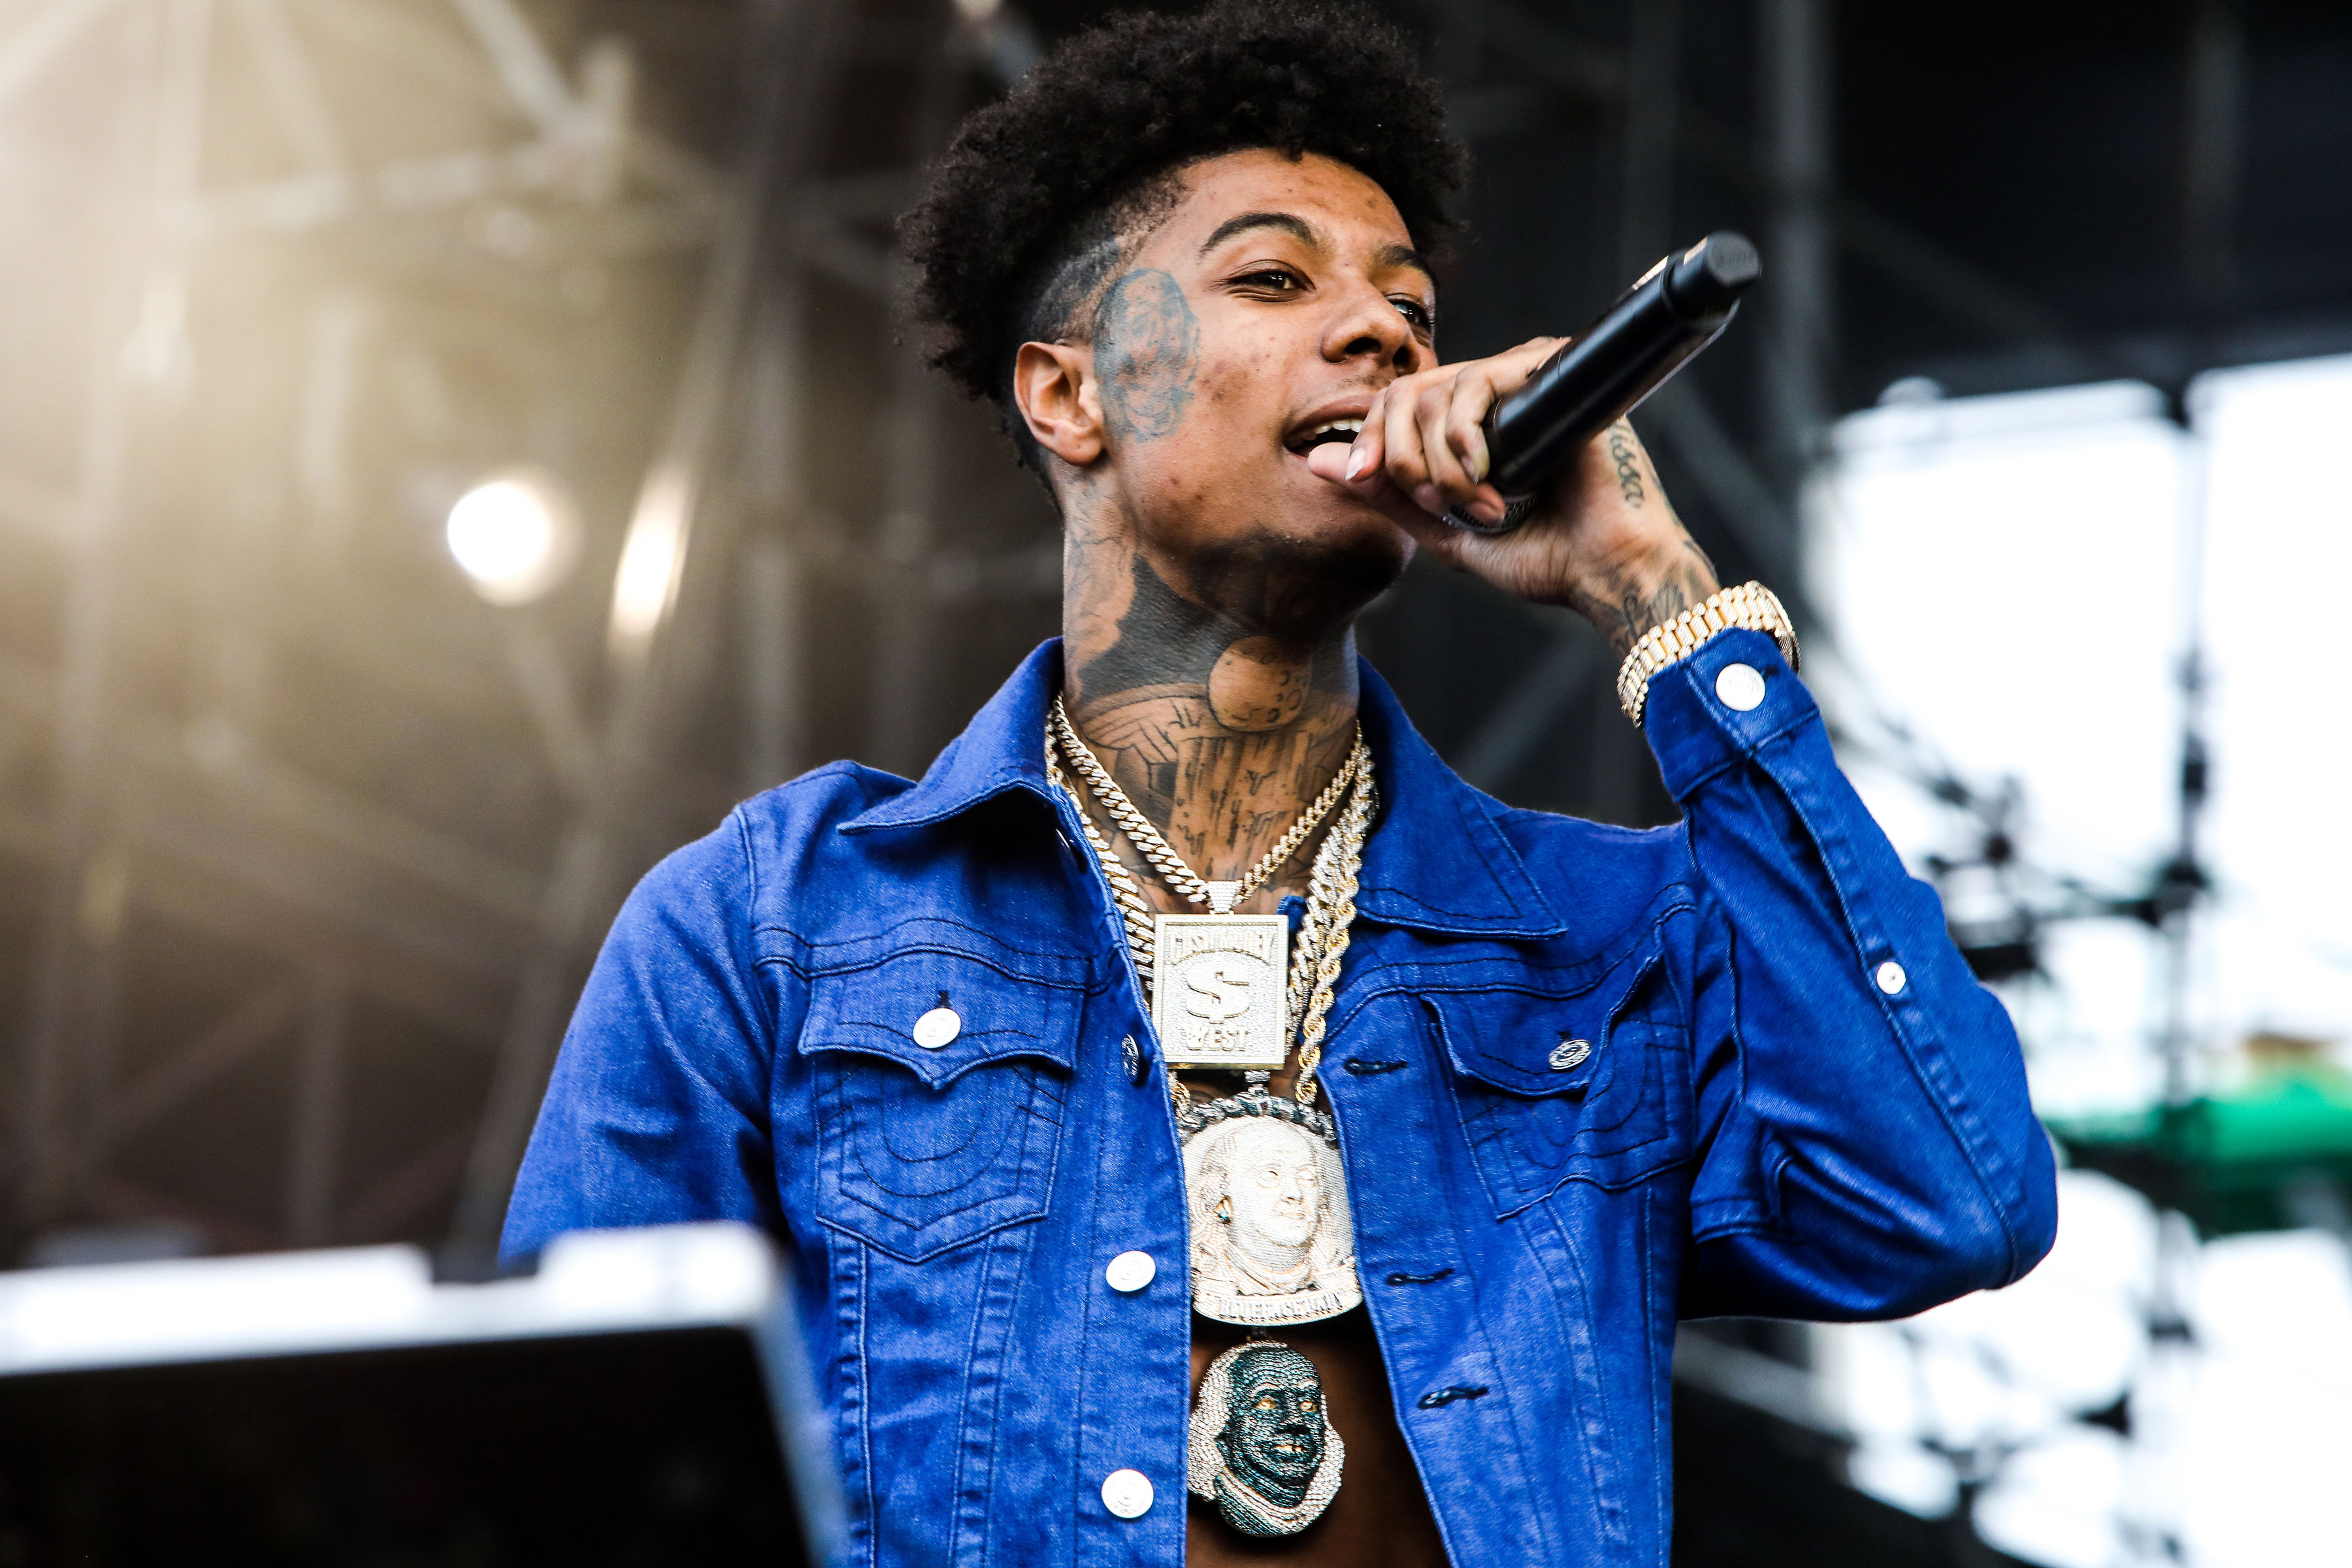 DJ Akademiks on Instagram blueface tattoos his jeweler name on the side  of his head